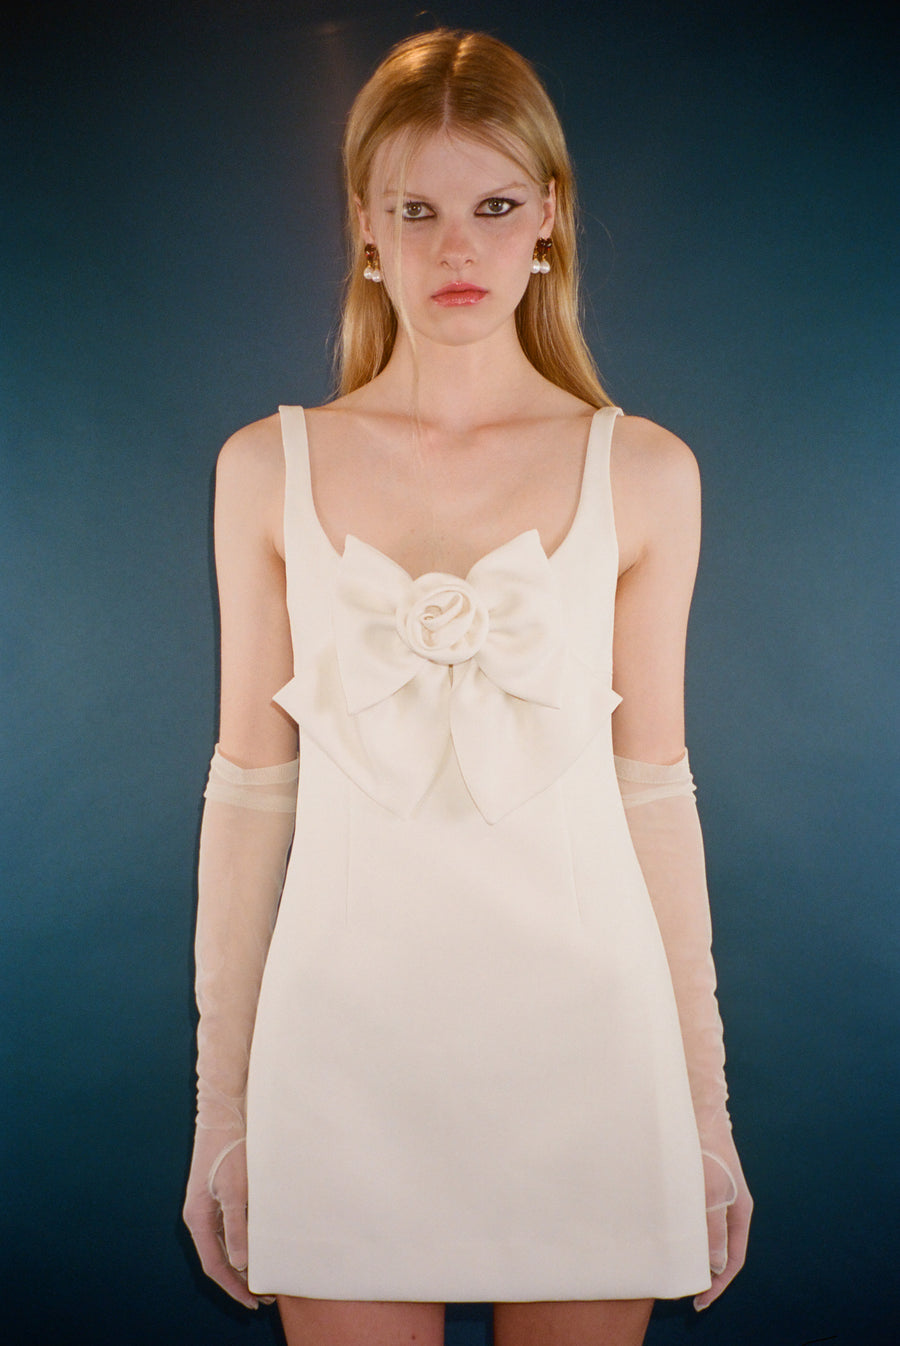 Tailored mini dress in cream with oversized bow at front on model